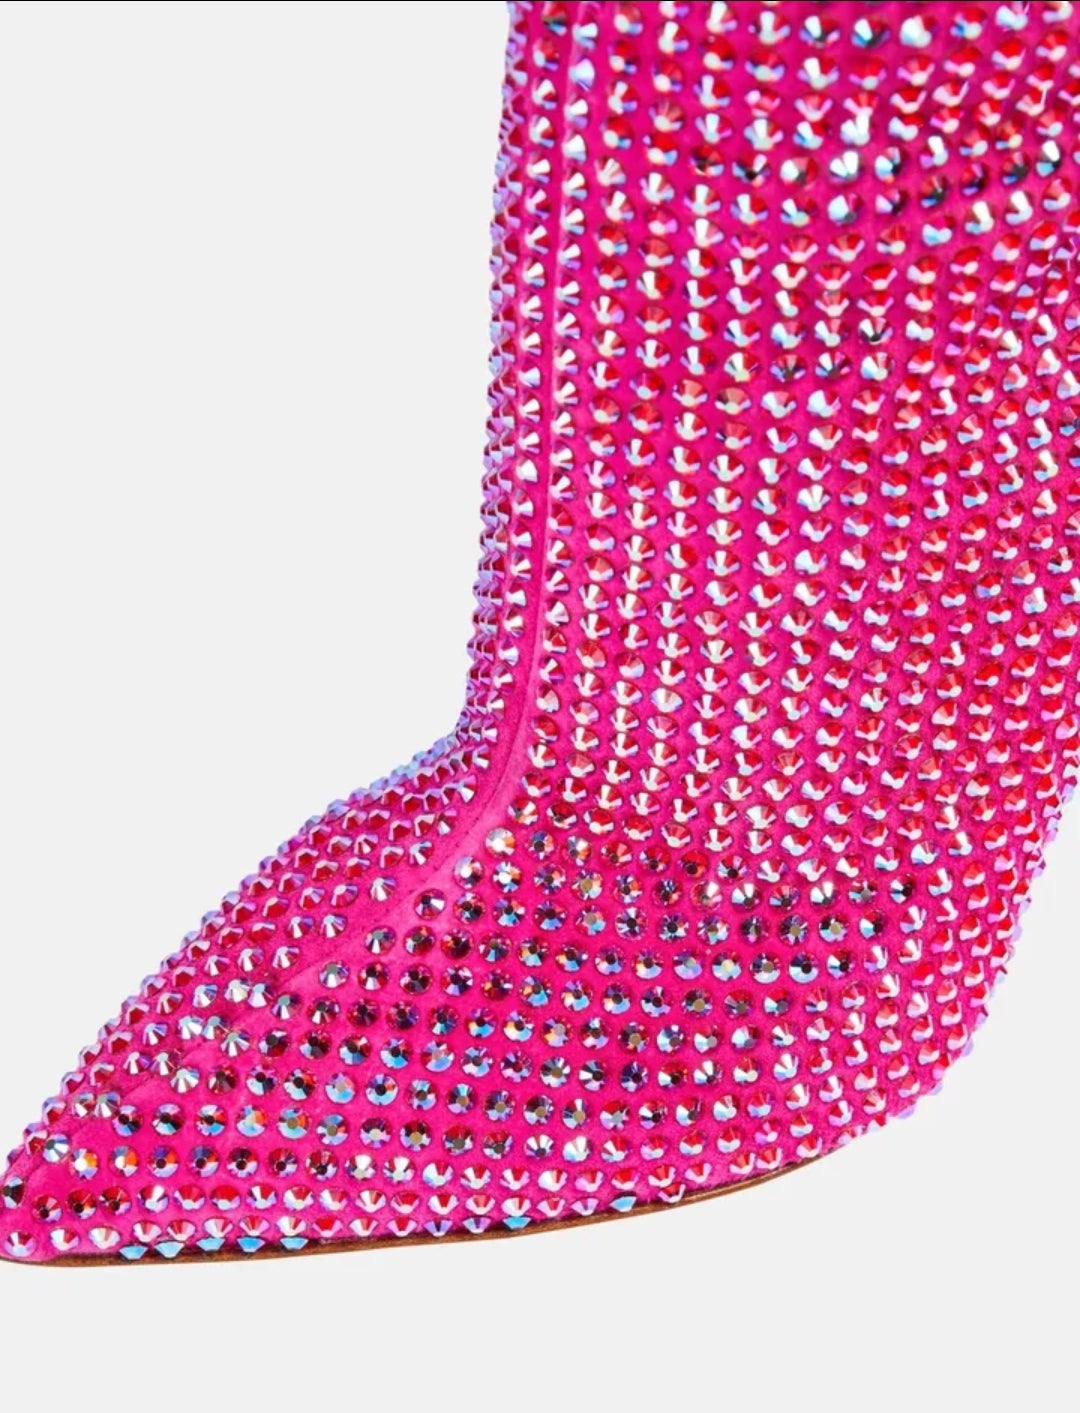 Studded pinky boots